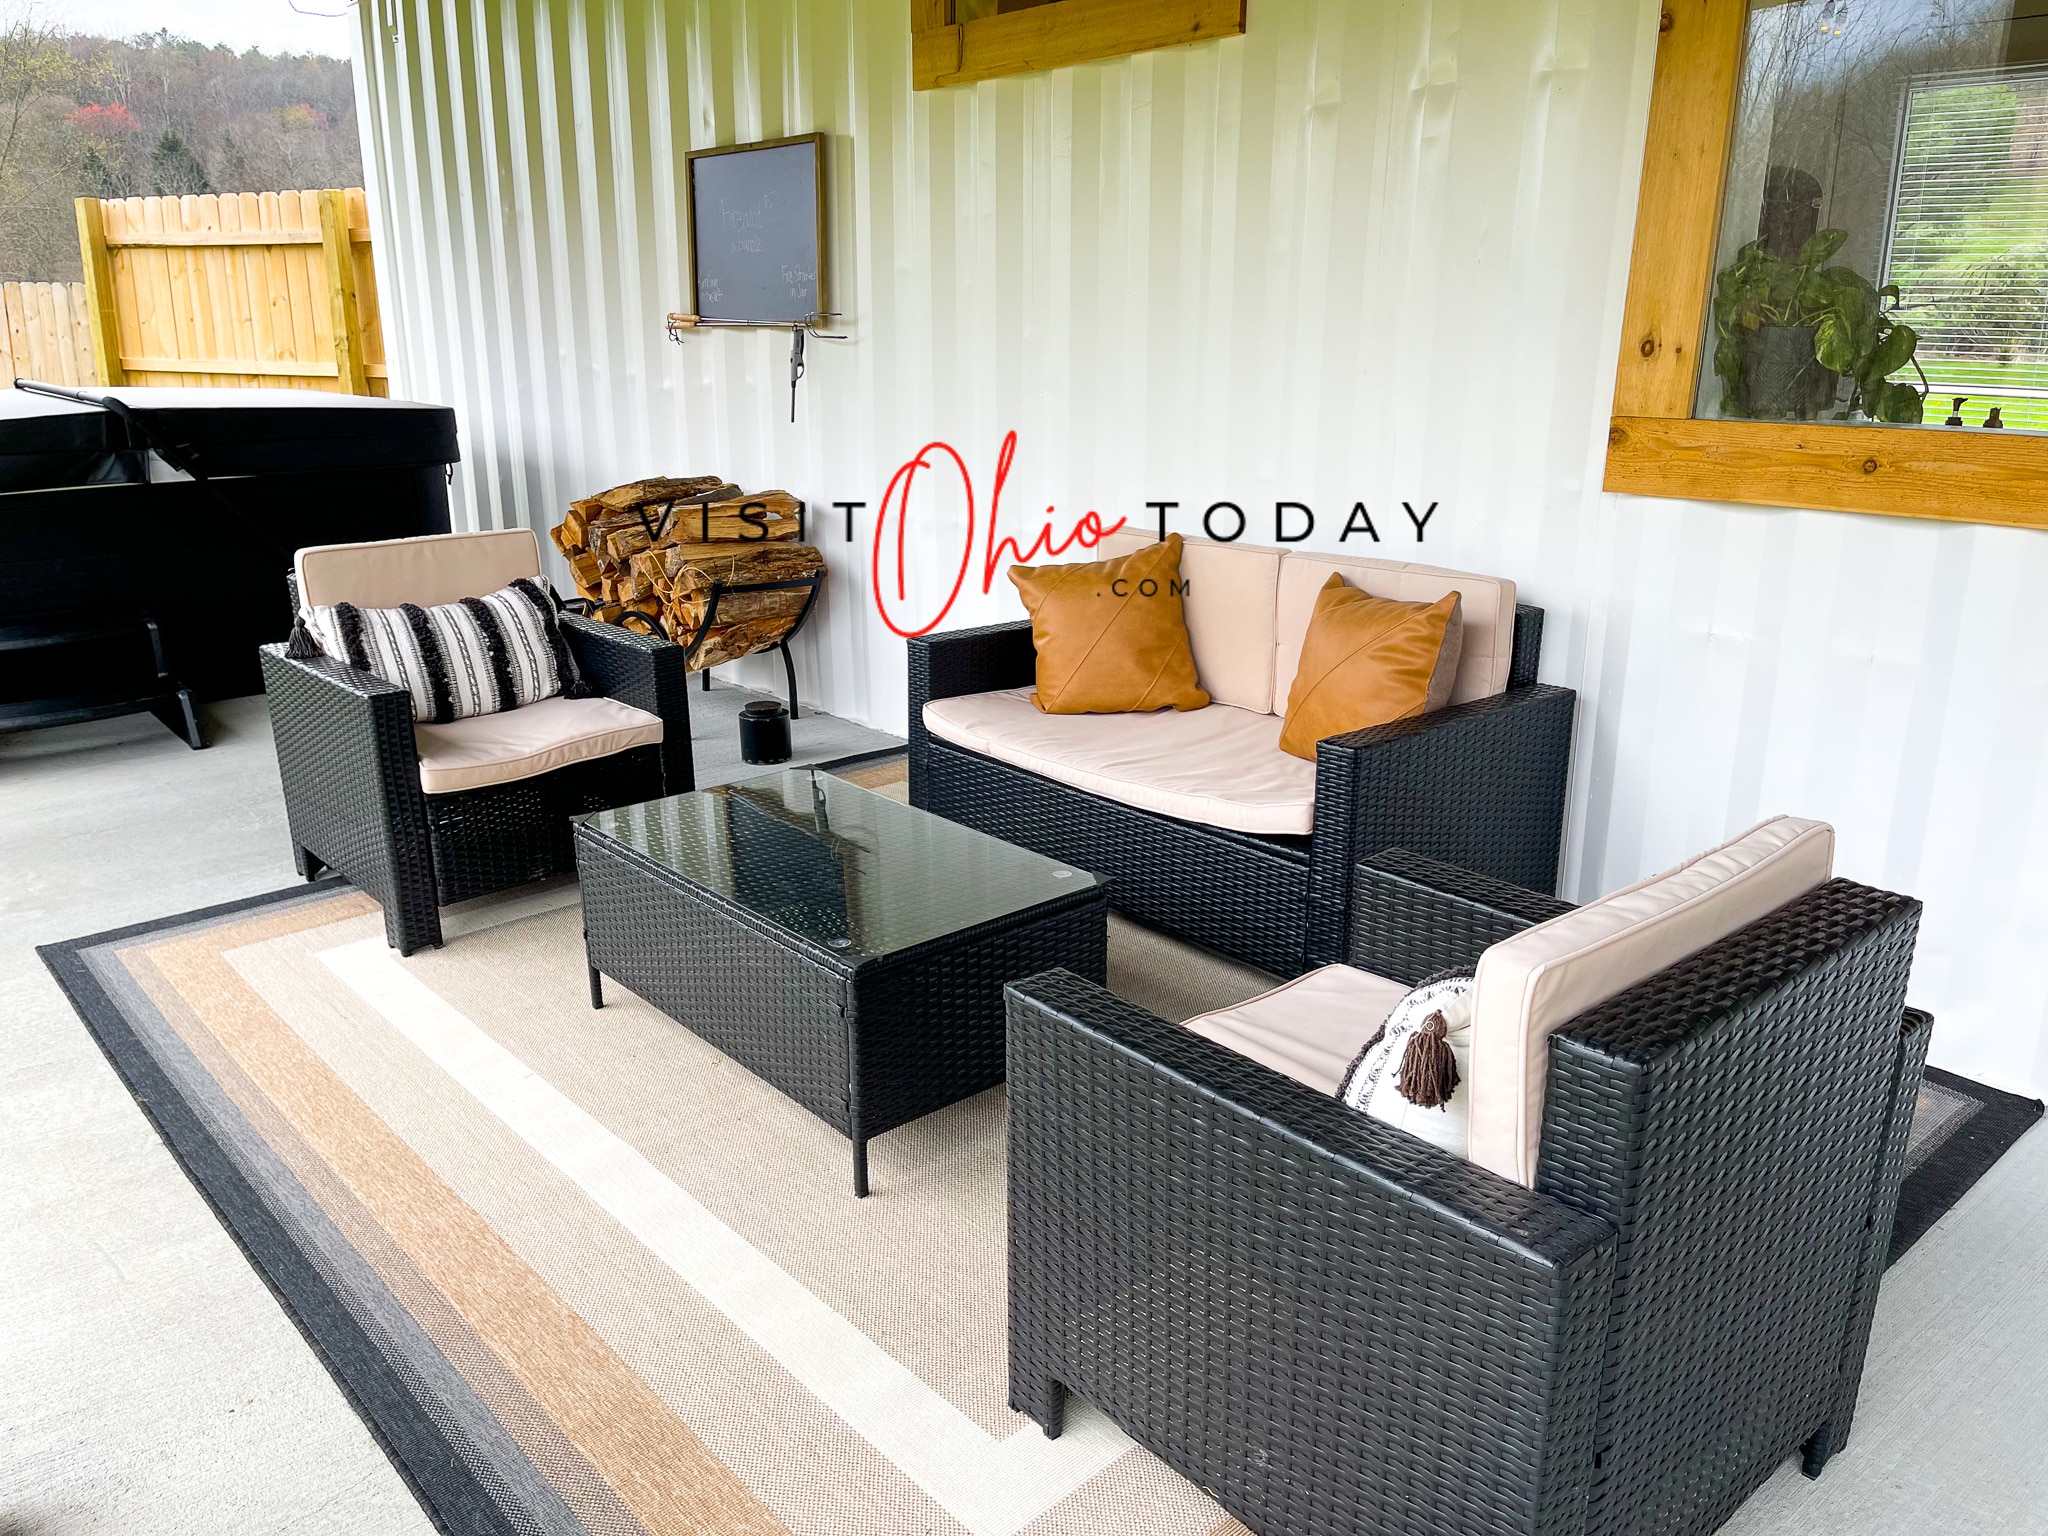 black and tan patio furniture in front of a white container tiny house